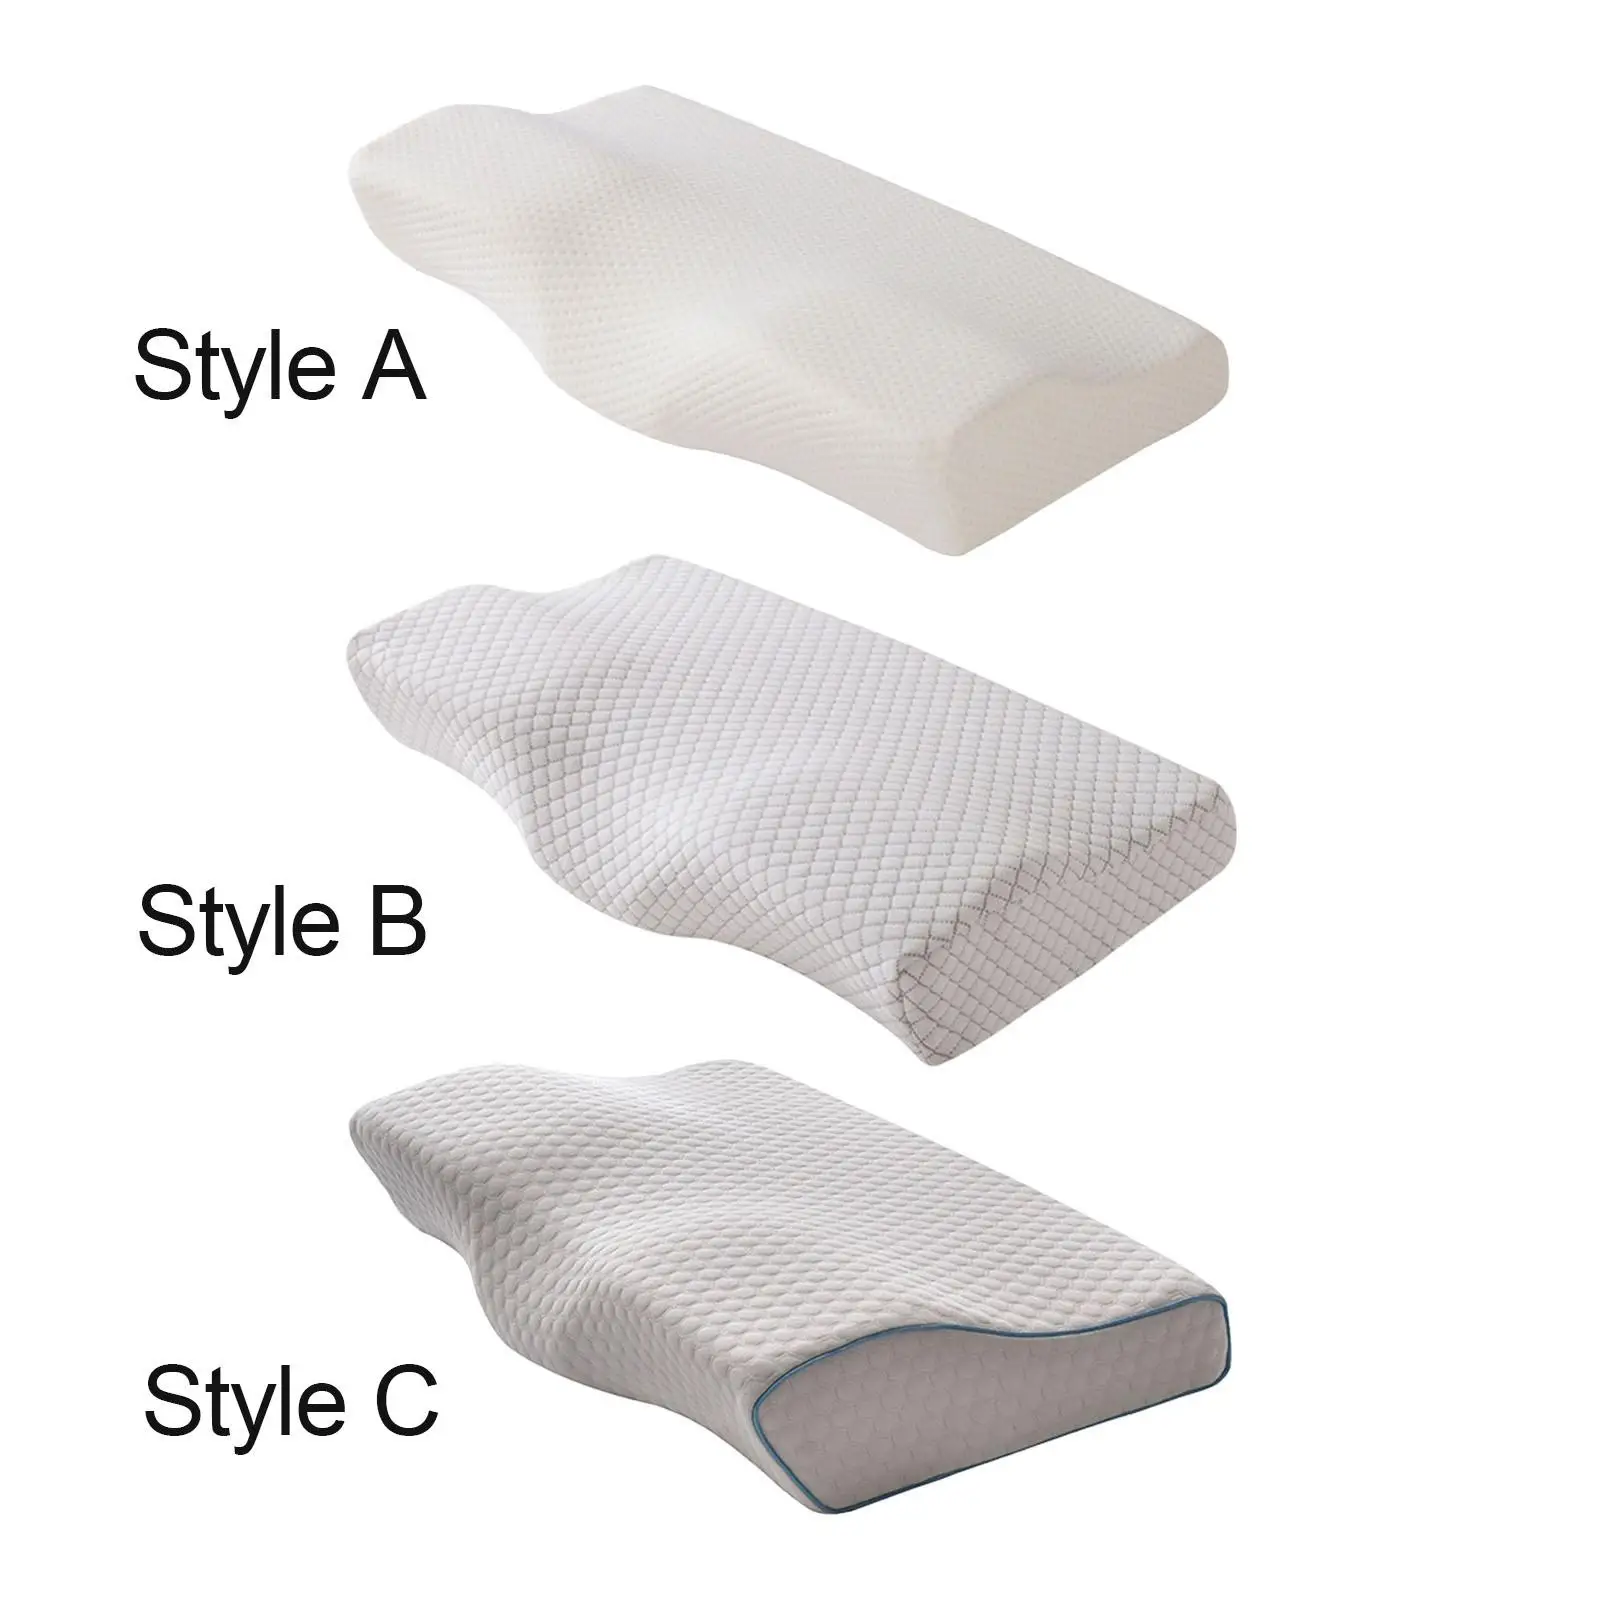 Butterfly Shaped Neck Pillows Cervical Memory Foam Bed Support Pillow for Side Sleepers Home Bedroom Sleeping Adult